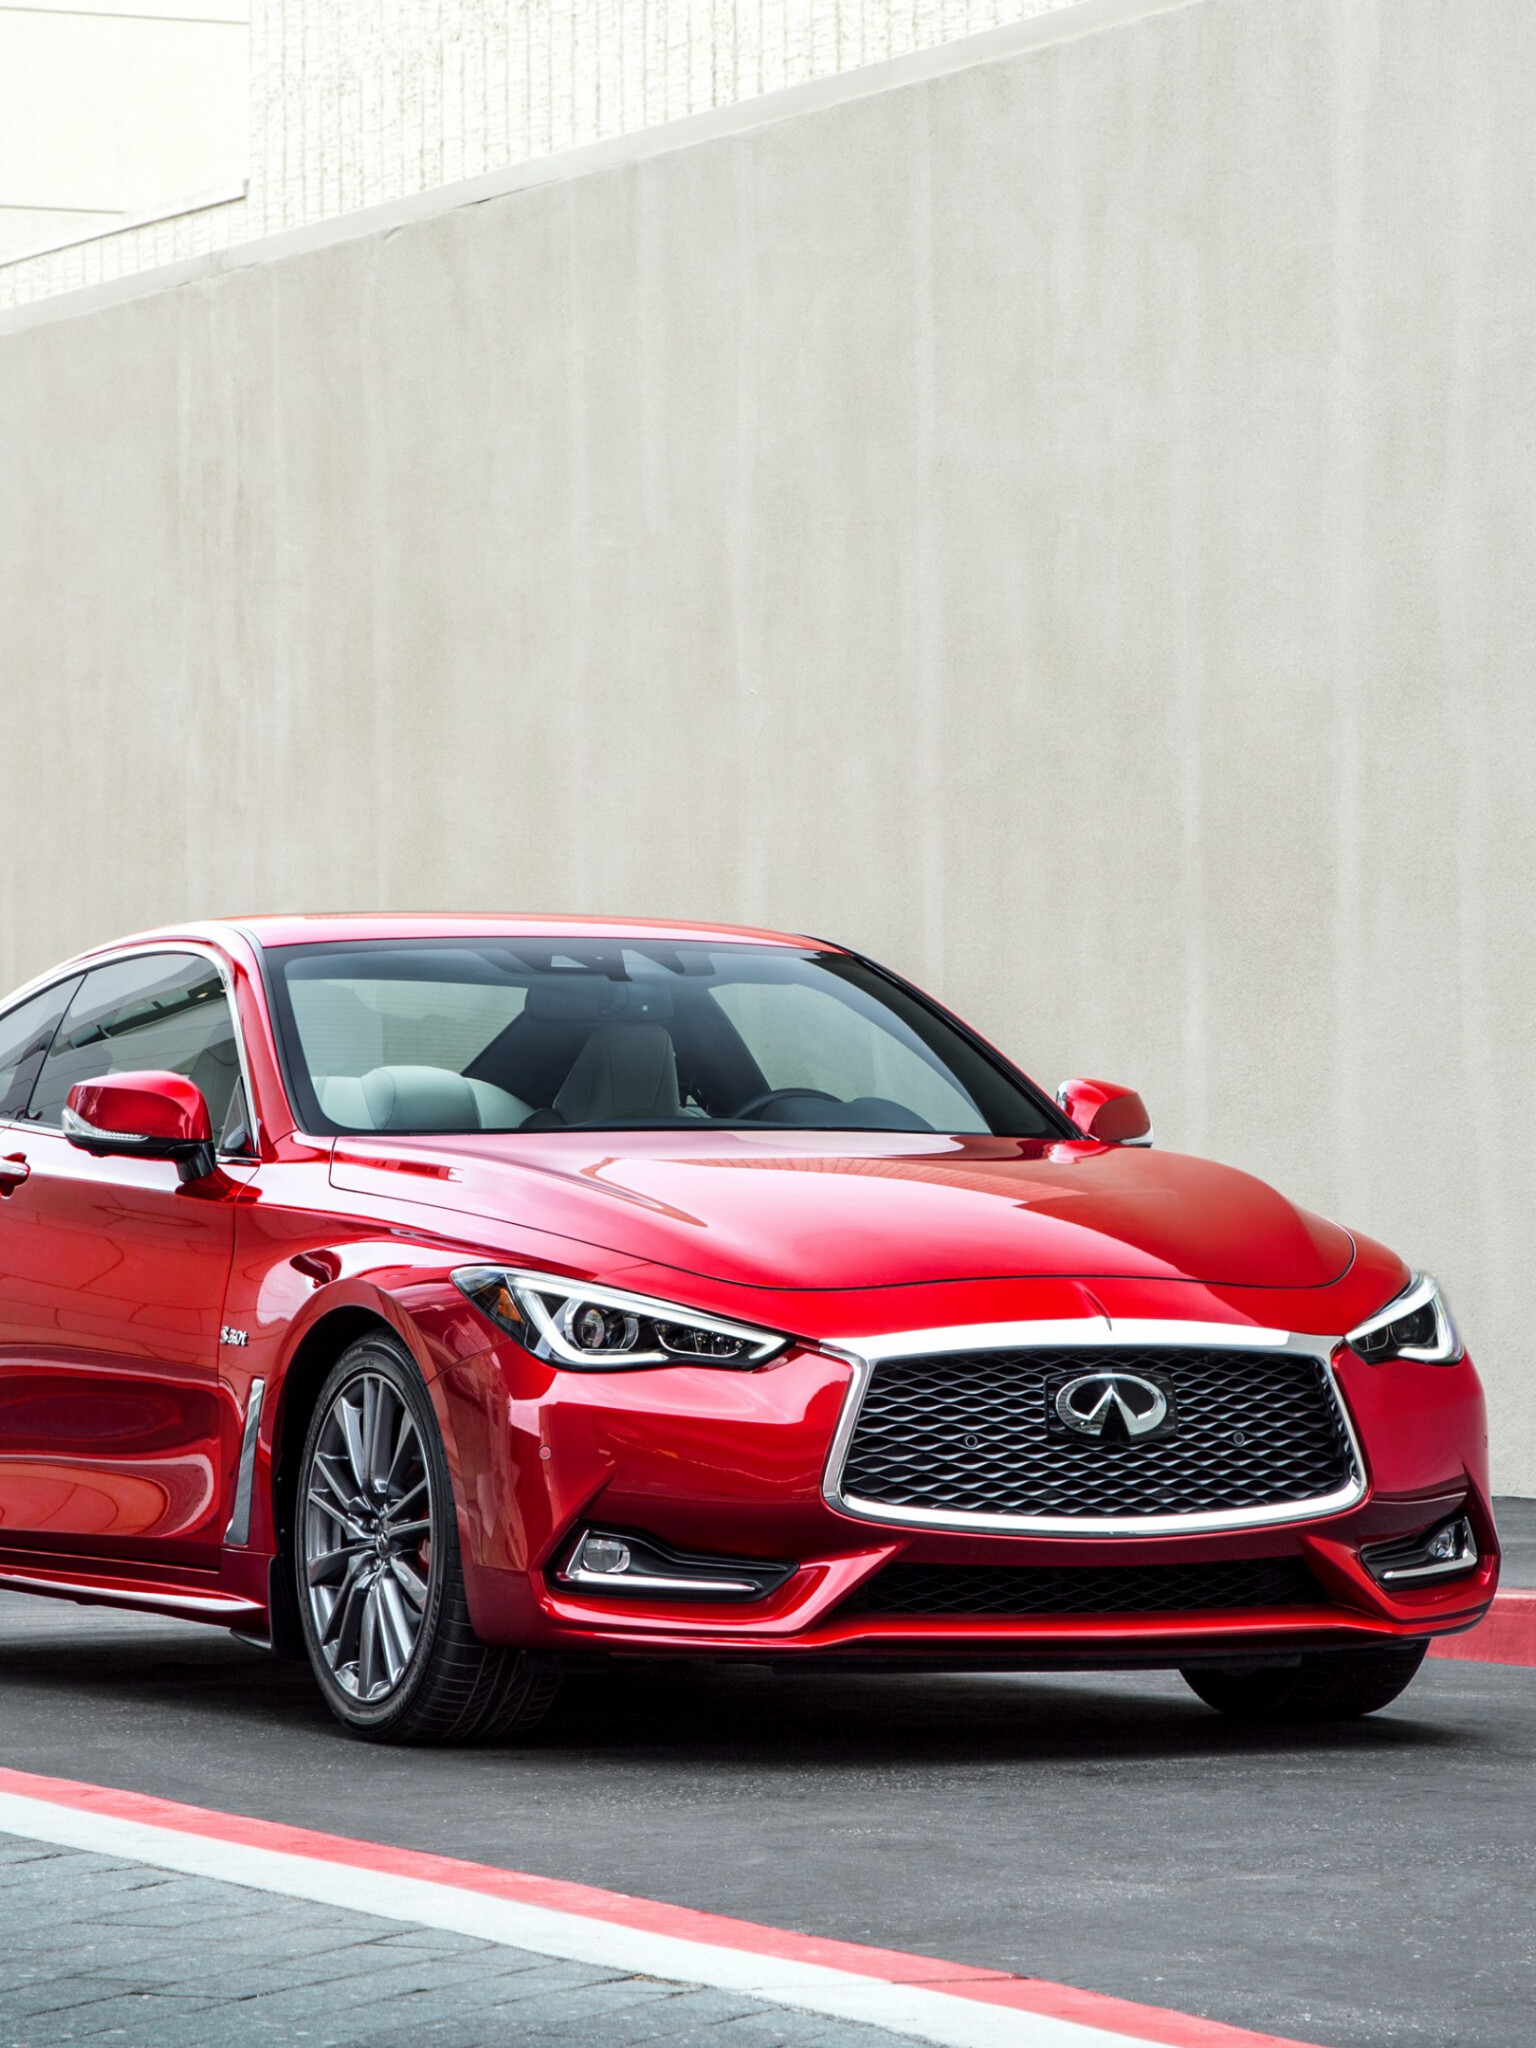 Infiniti: Q60 Red Sport 400, Coupe, 400 horsepower engine, Dynamic handling technologies and intuitive driver controls. 1540x2050 HD Background.